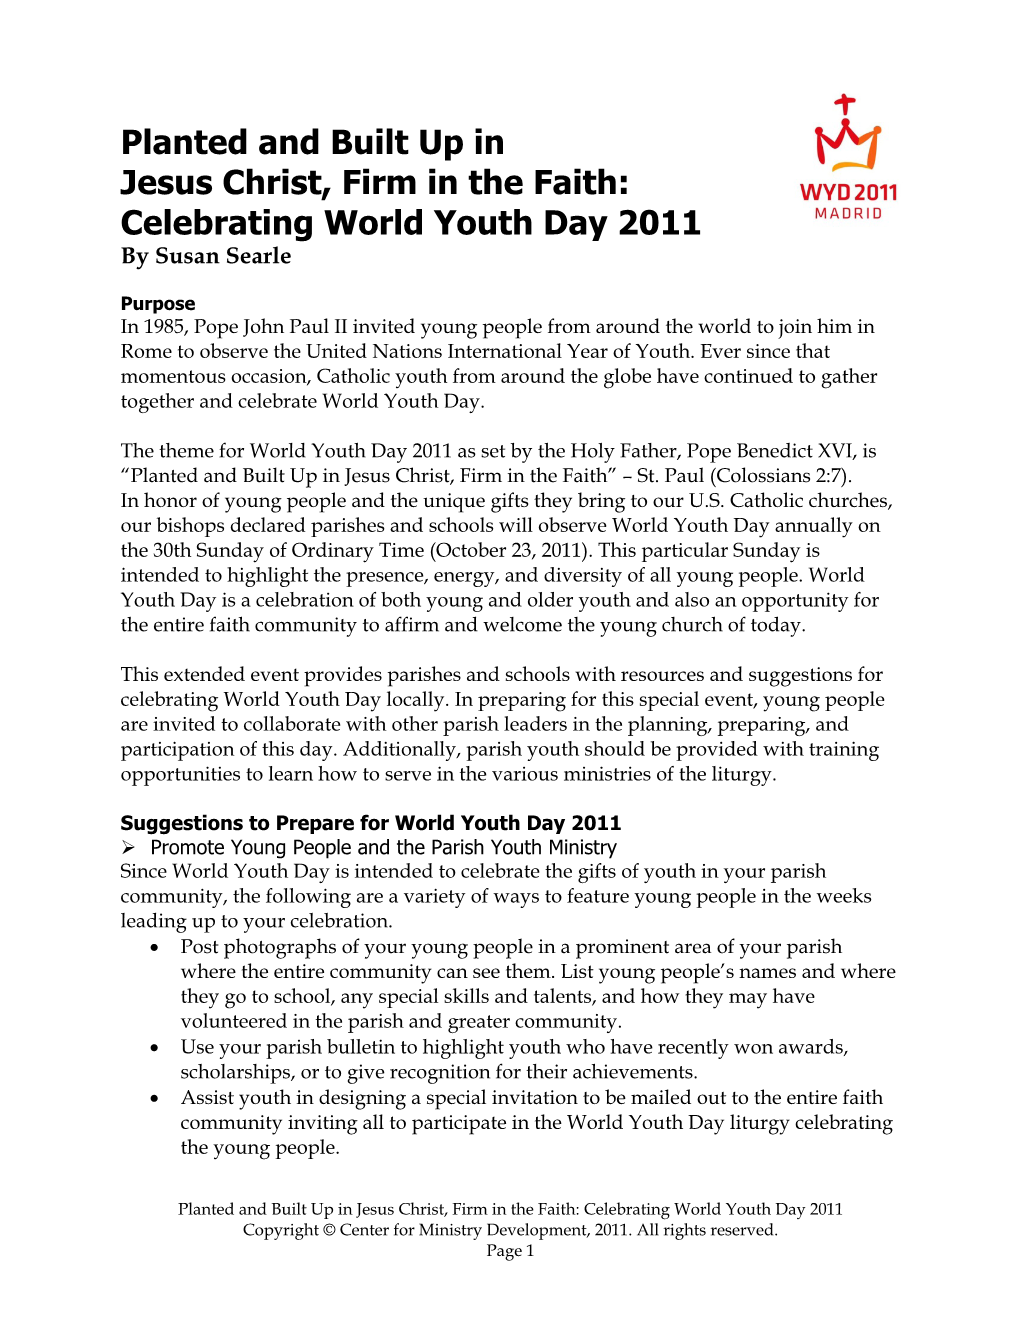 Planted and Built up in Jesus Christ, Firm in the Faith: Celebrating World Youth Day 2011 by Susan Searle